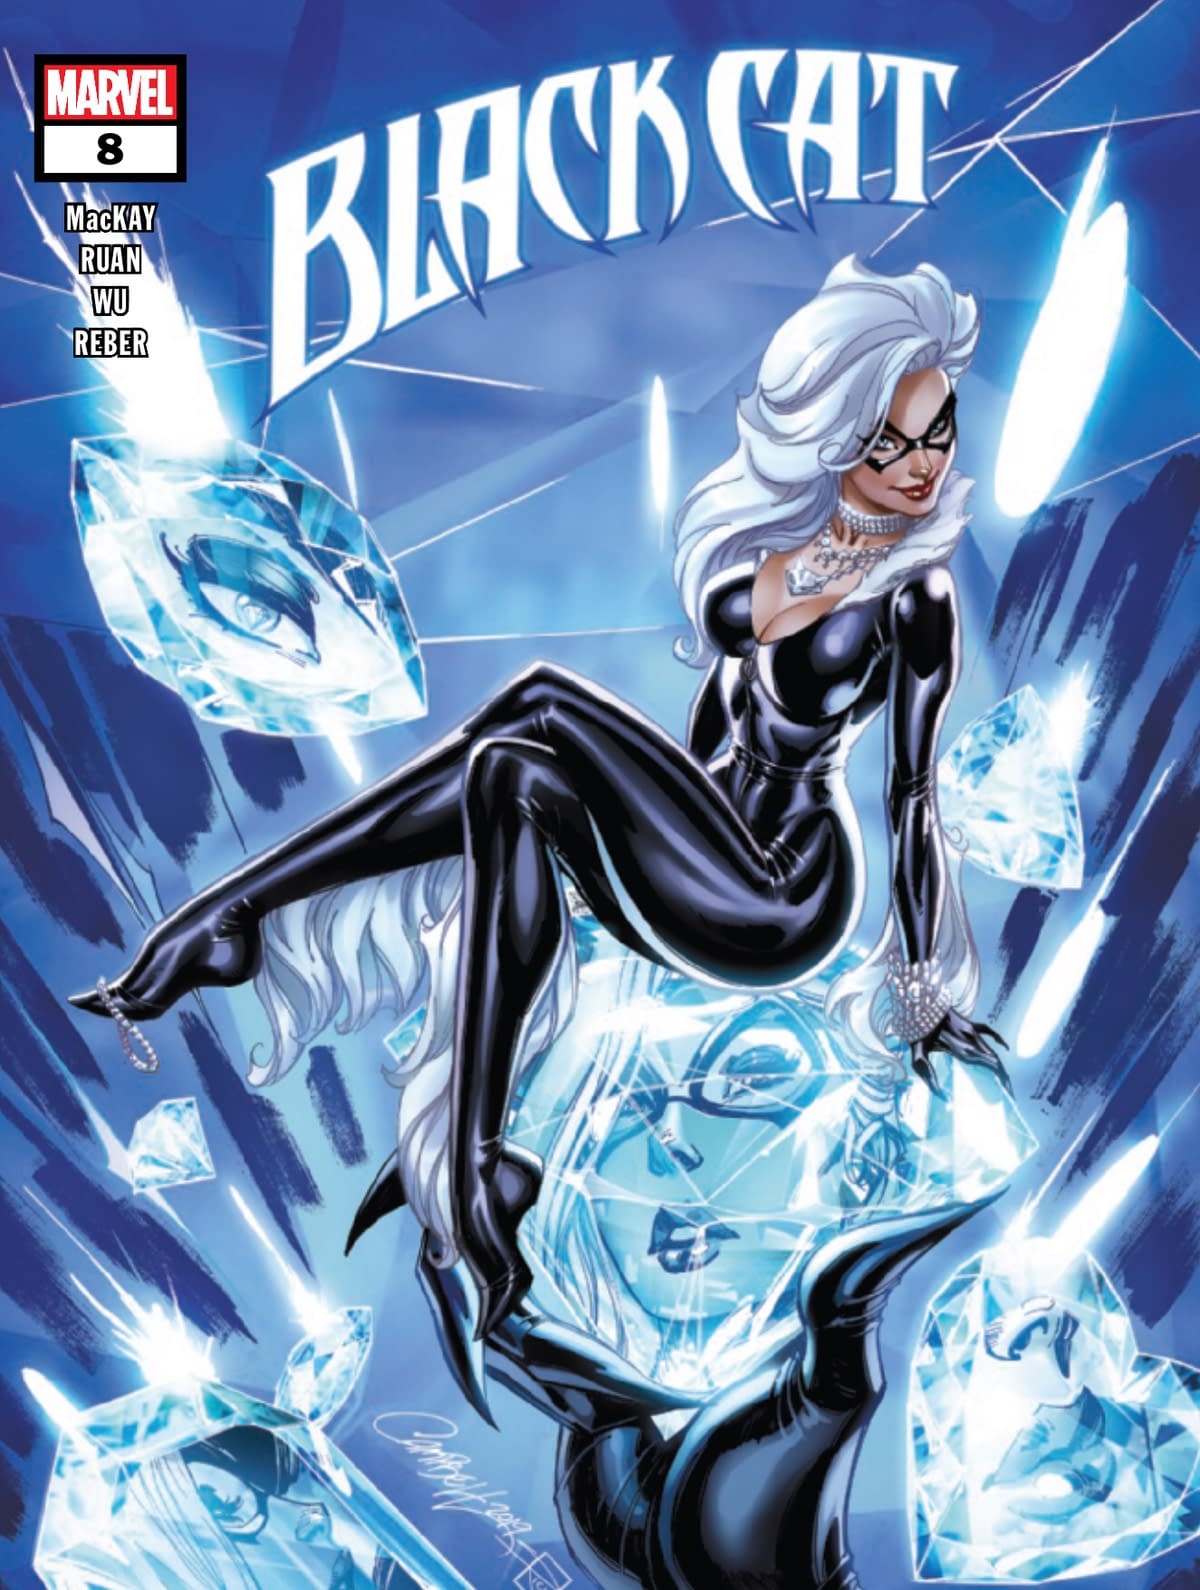 REVIEW: Black Cat #8 -- "This Book Is Fun, Smart, Well-Crafted And Enjoyable"